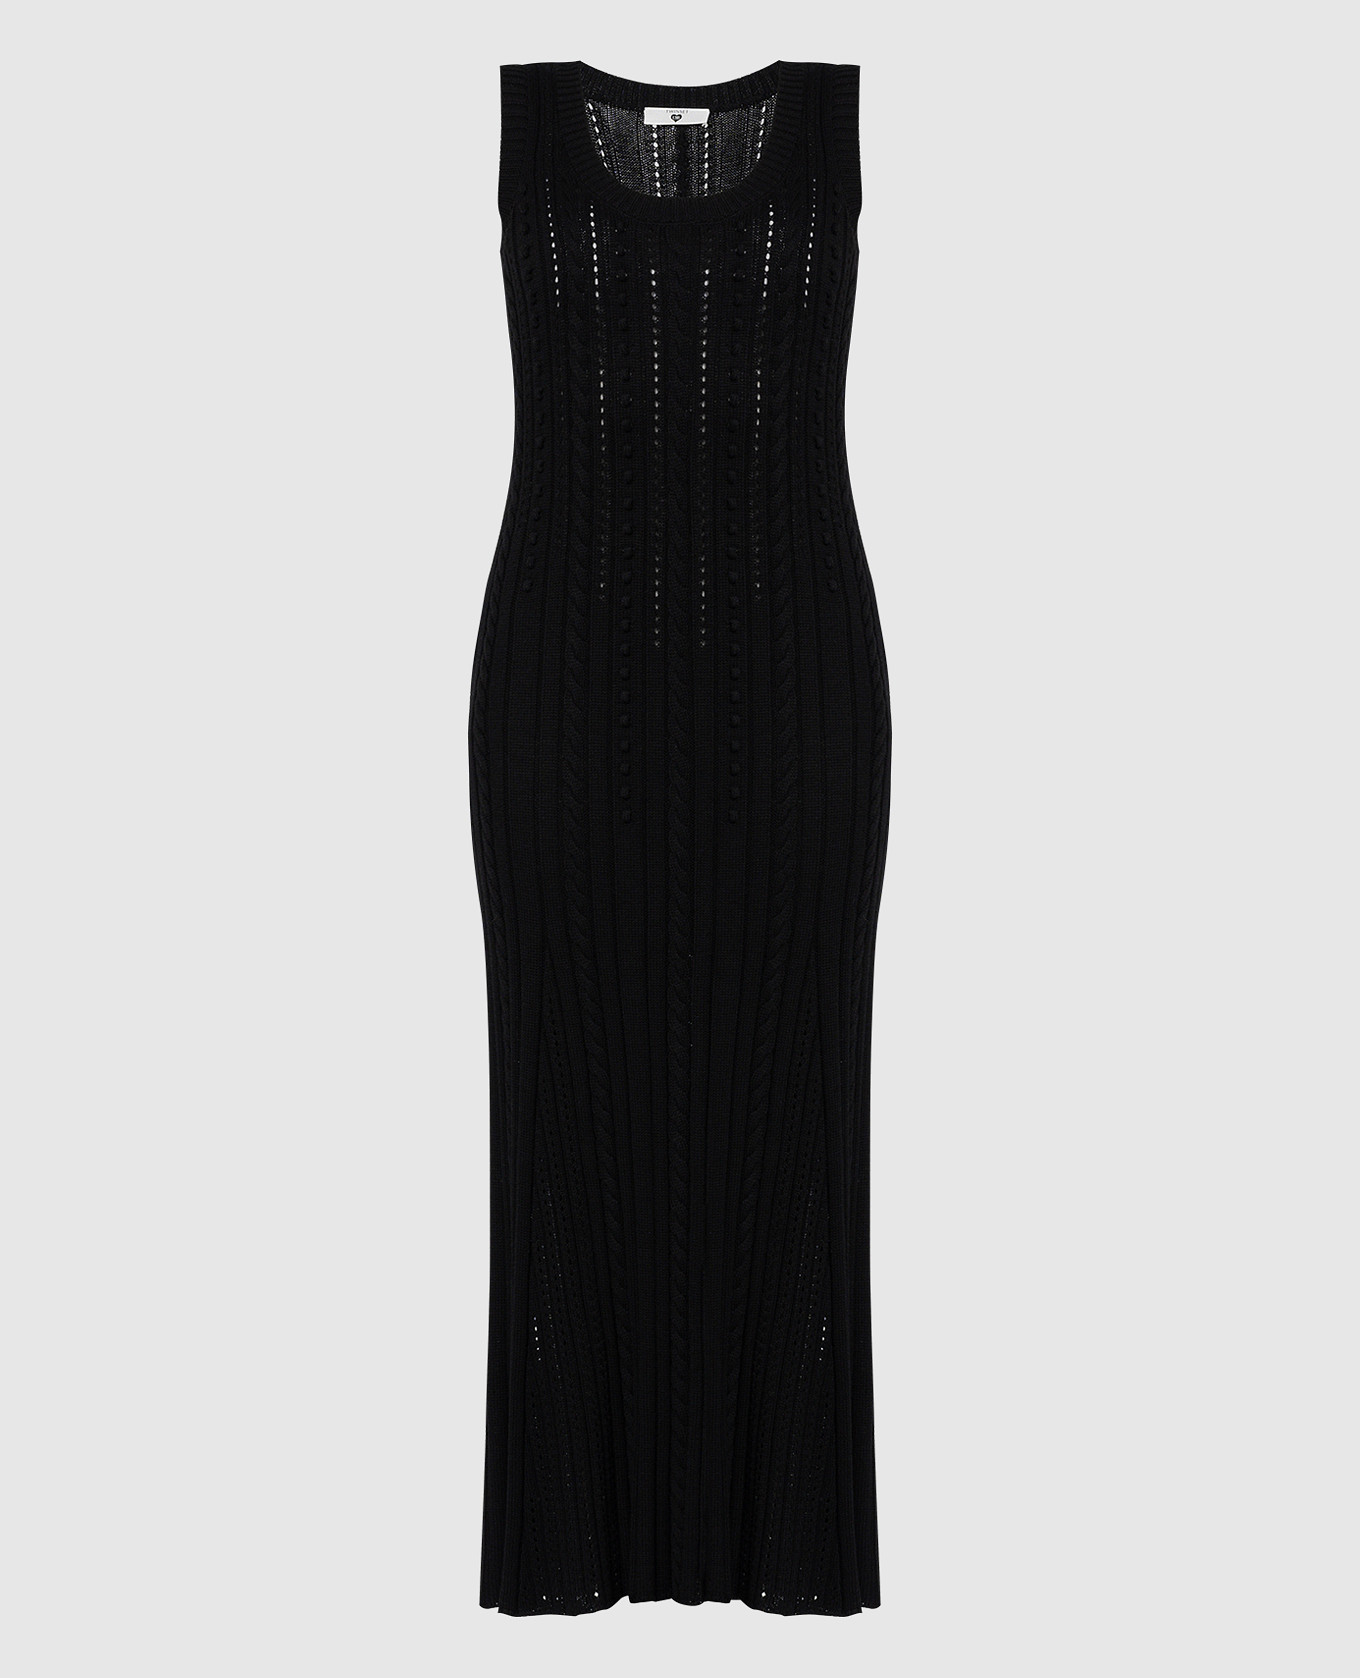 Black dress with textured pattern with logo